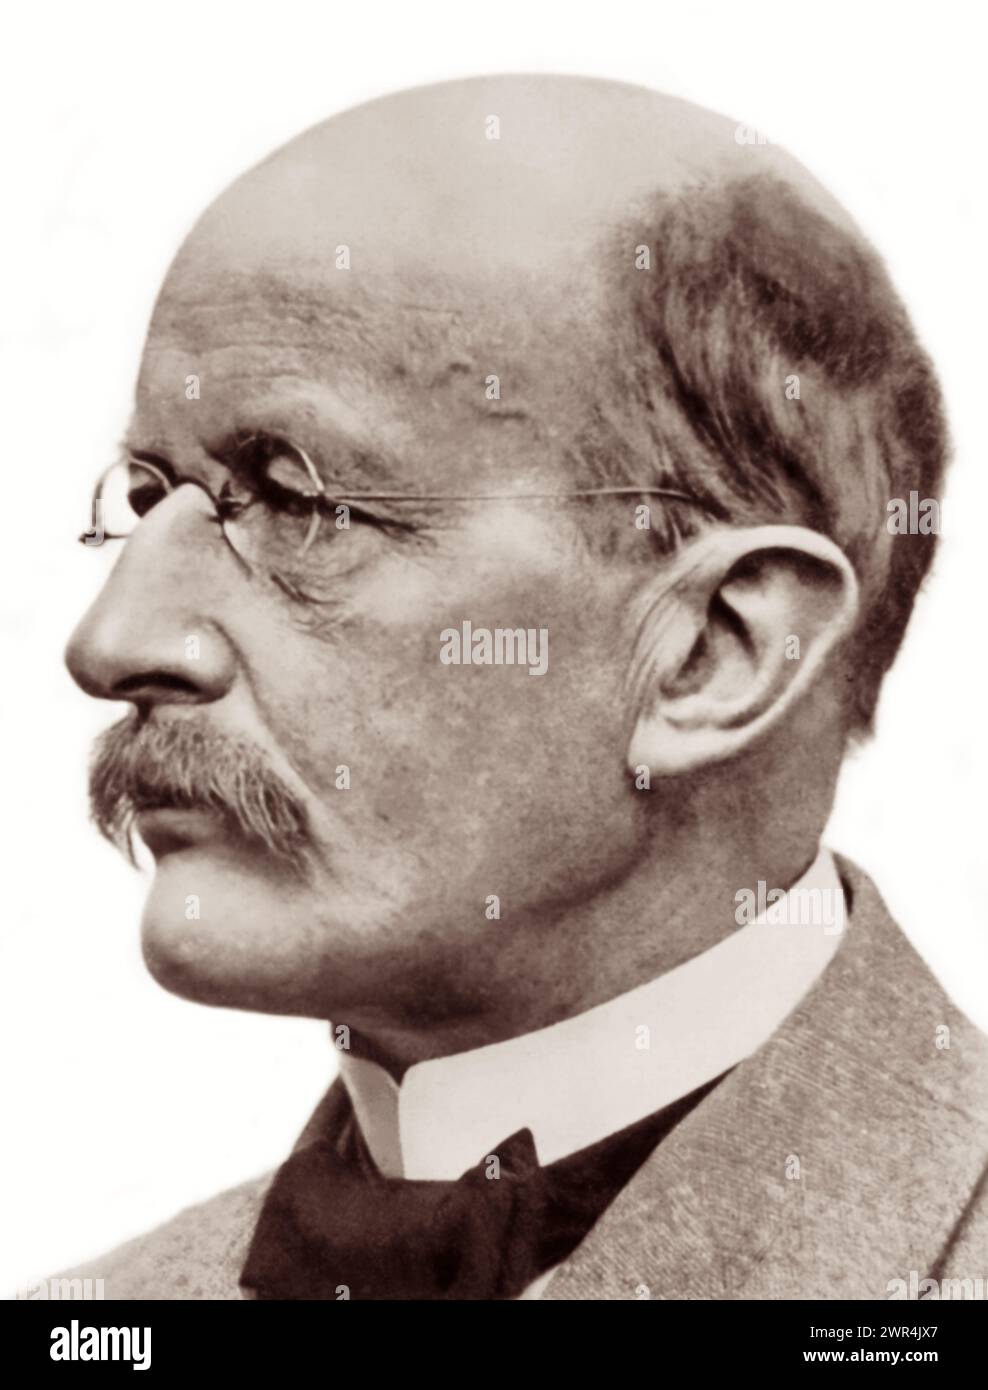 Max Planck (1858-1947), German theoretical physicist who was the originator of quantum theory, for which he won the Nobel Prize for Physics in 1918. (Photo c1910) Stock Photo